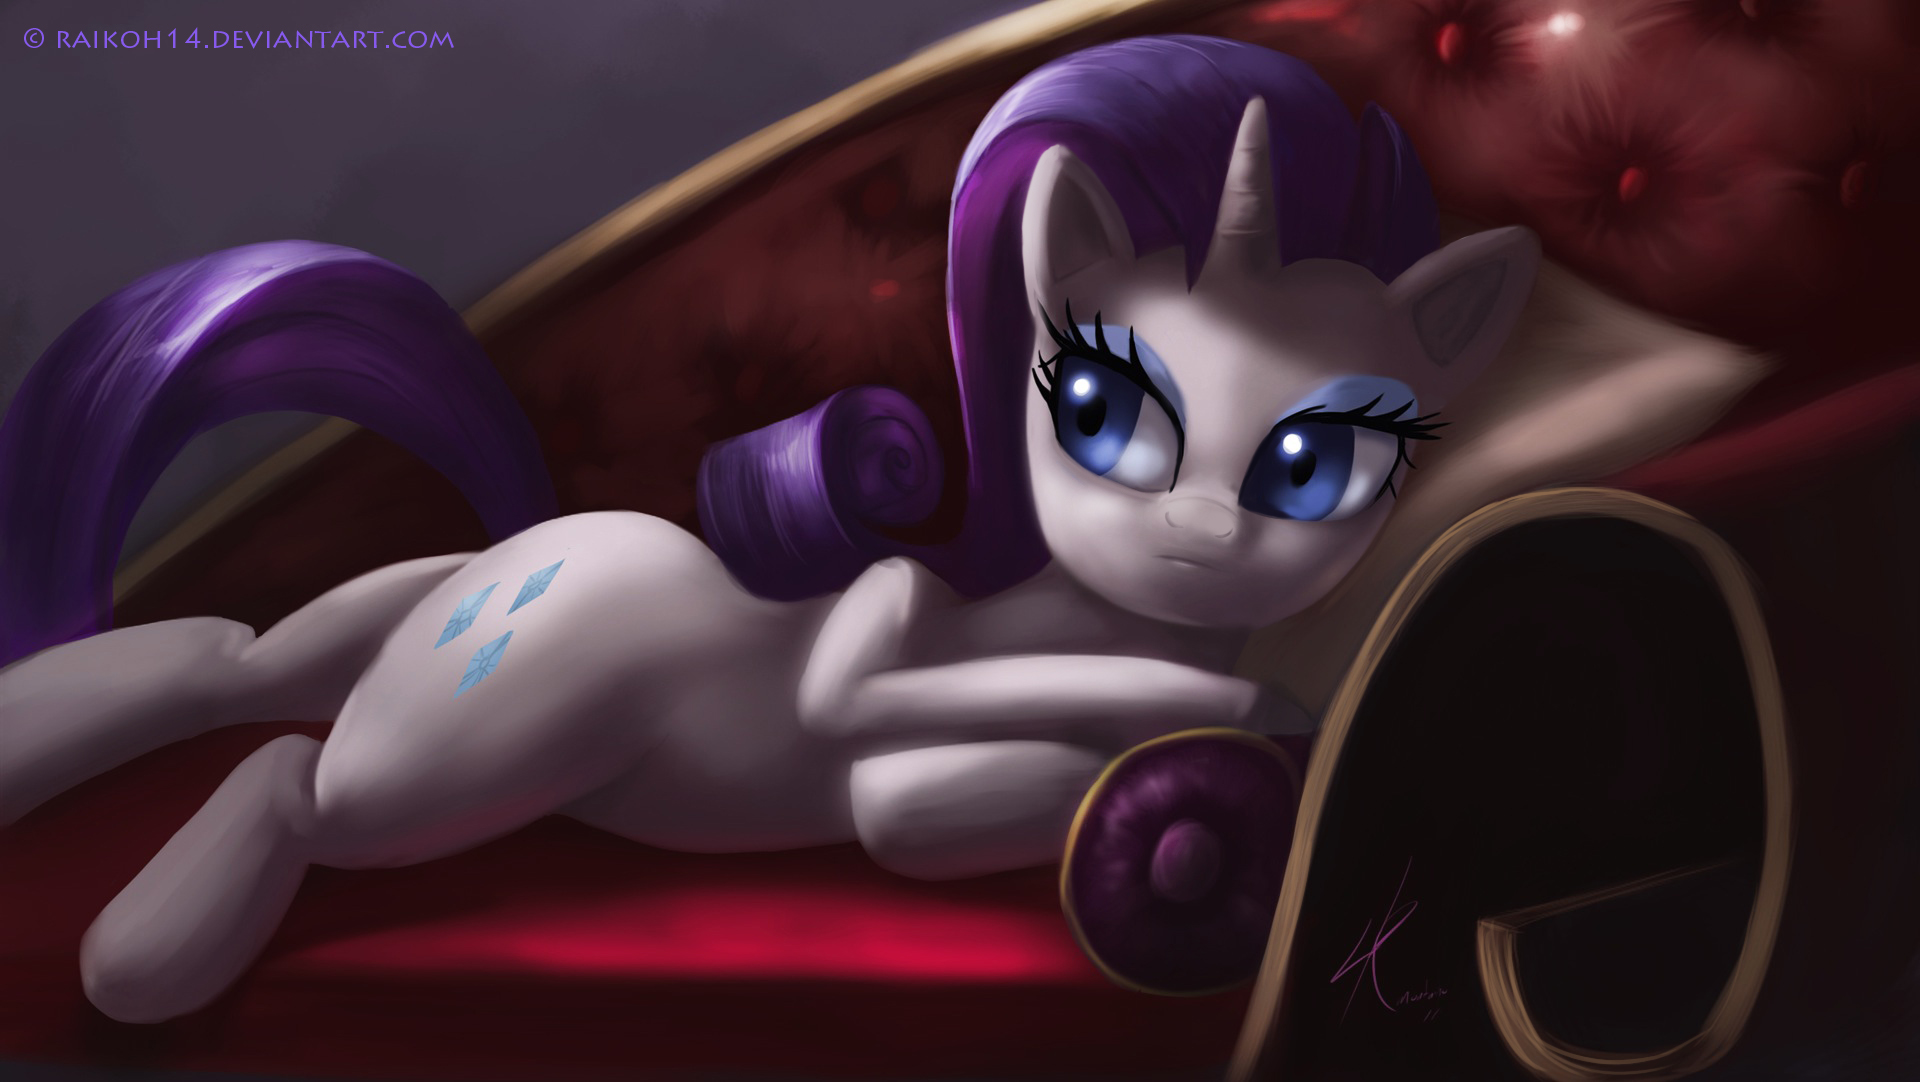 Rarity relaxing on her sofa by Raikoh-illust